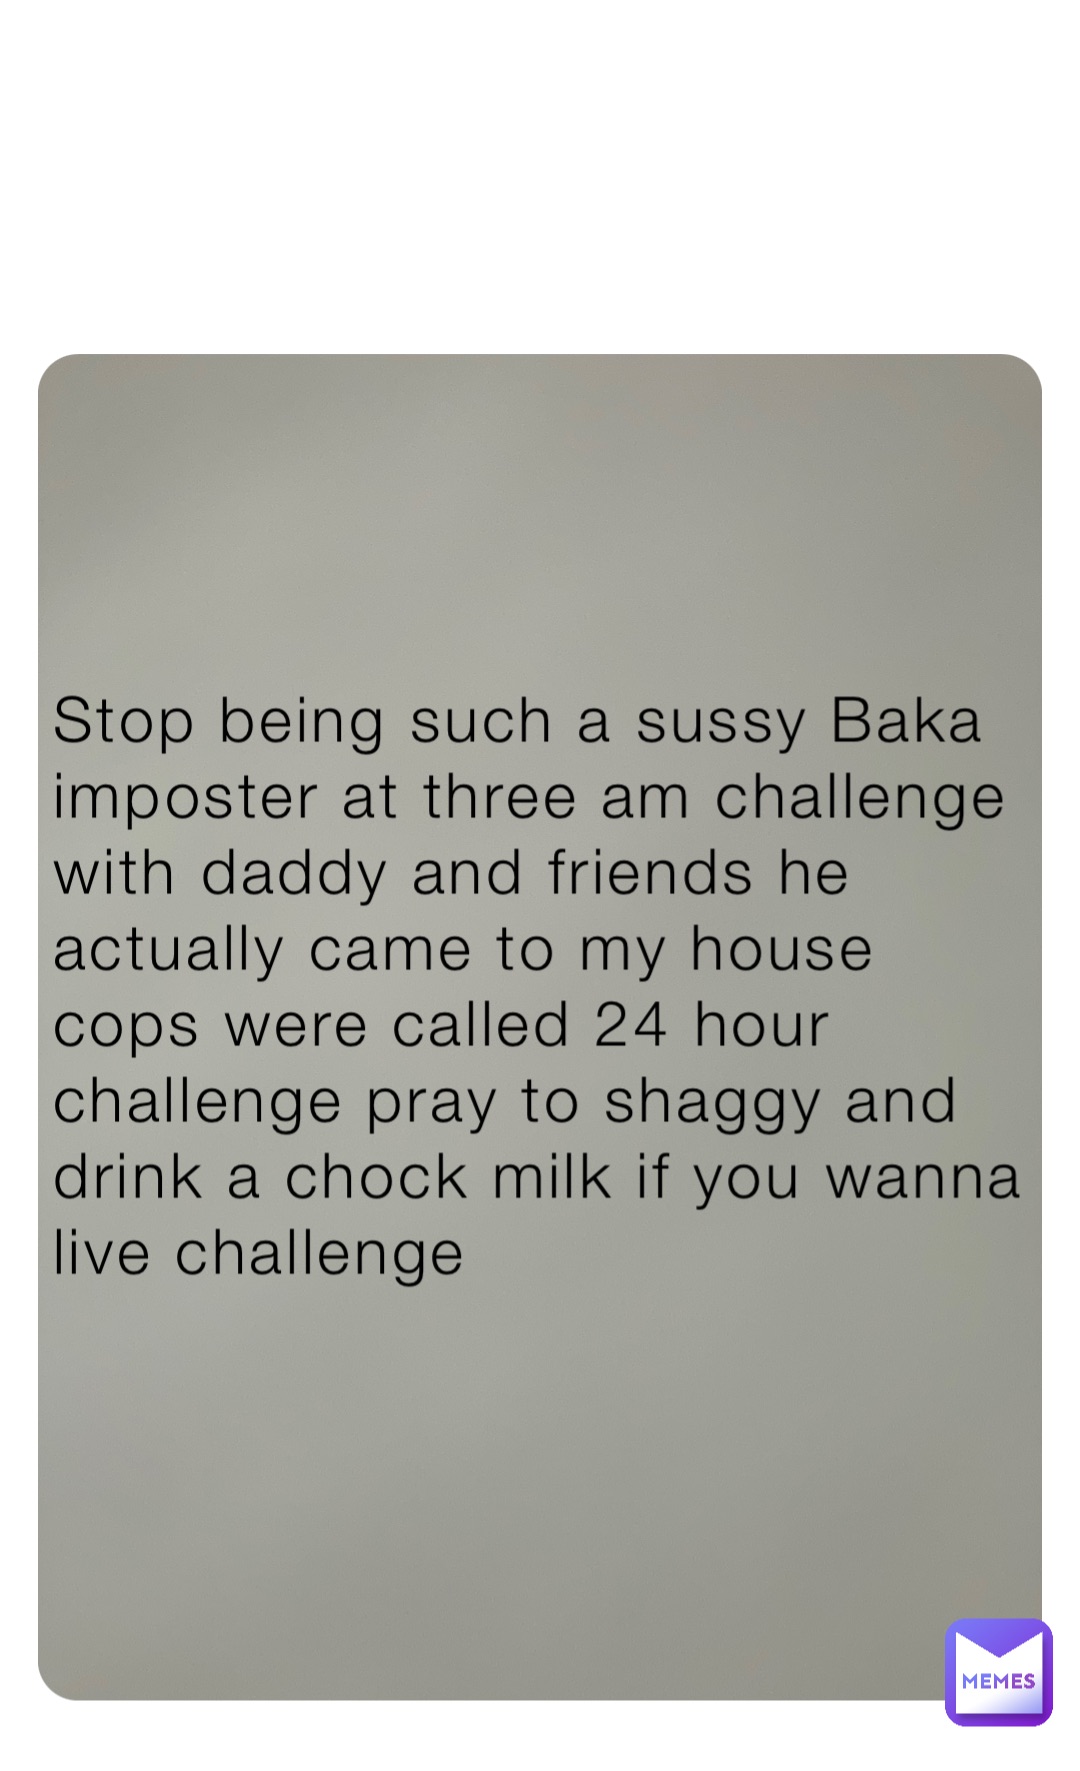 Stop being such a sussy Baka imposter at three am challenge with daddy and friends he actually came to my house cops were called 24 hour challenge pray to shaggy and drink a chock milk if you wanna live challenge